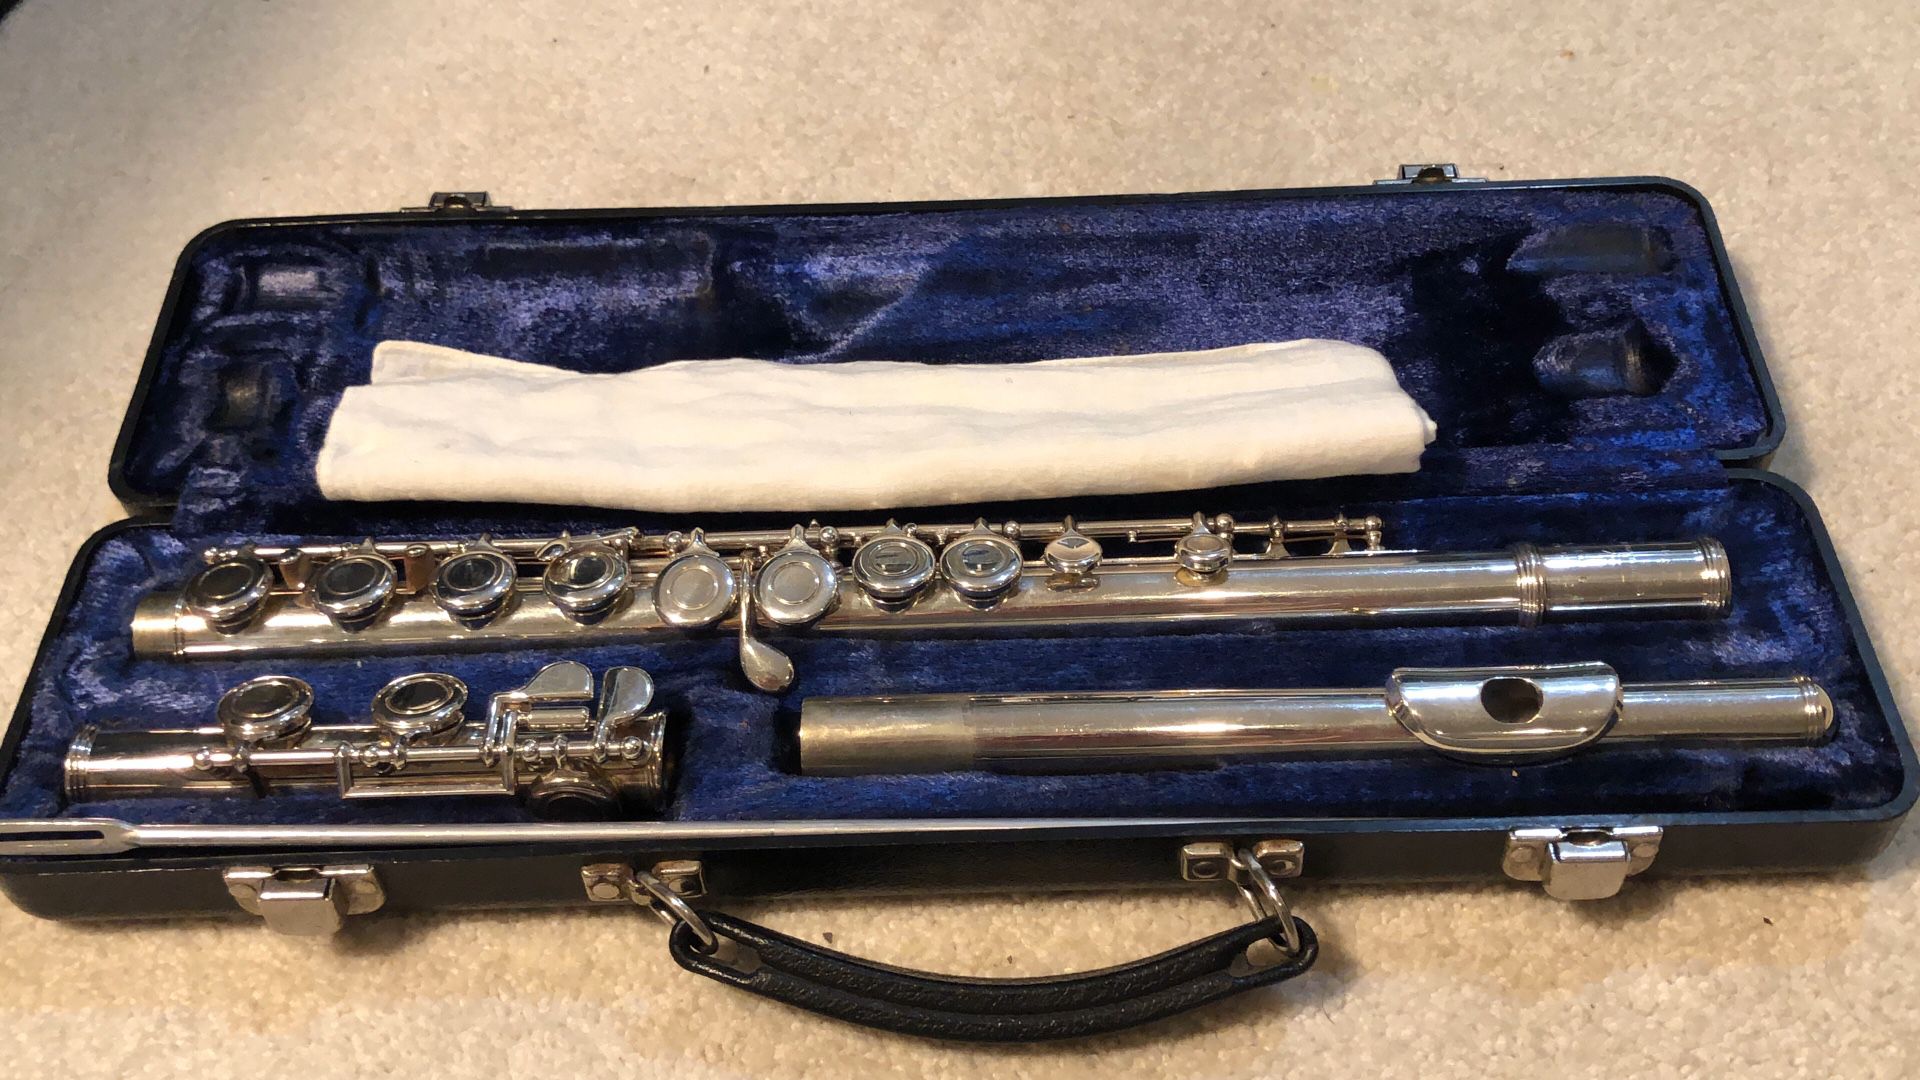 Flute (could be the Perfect Gift)